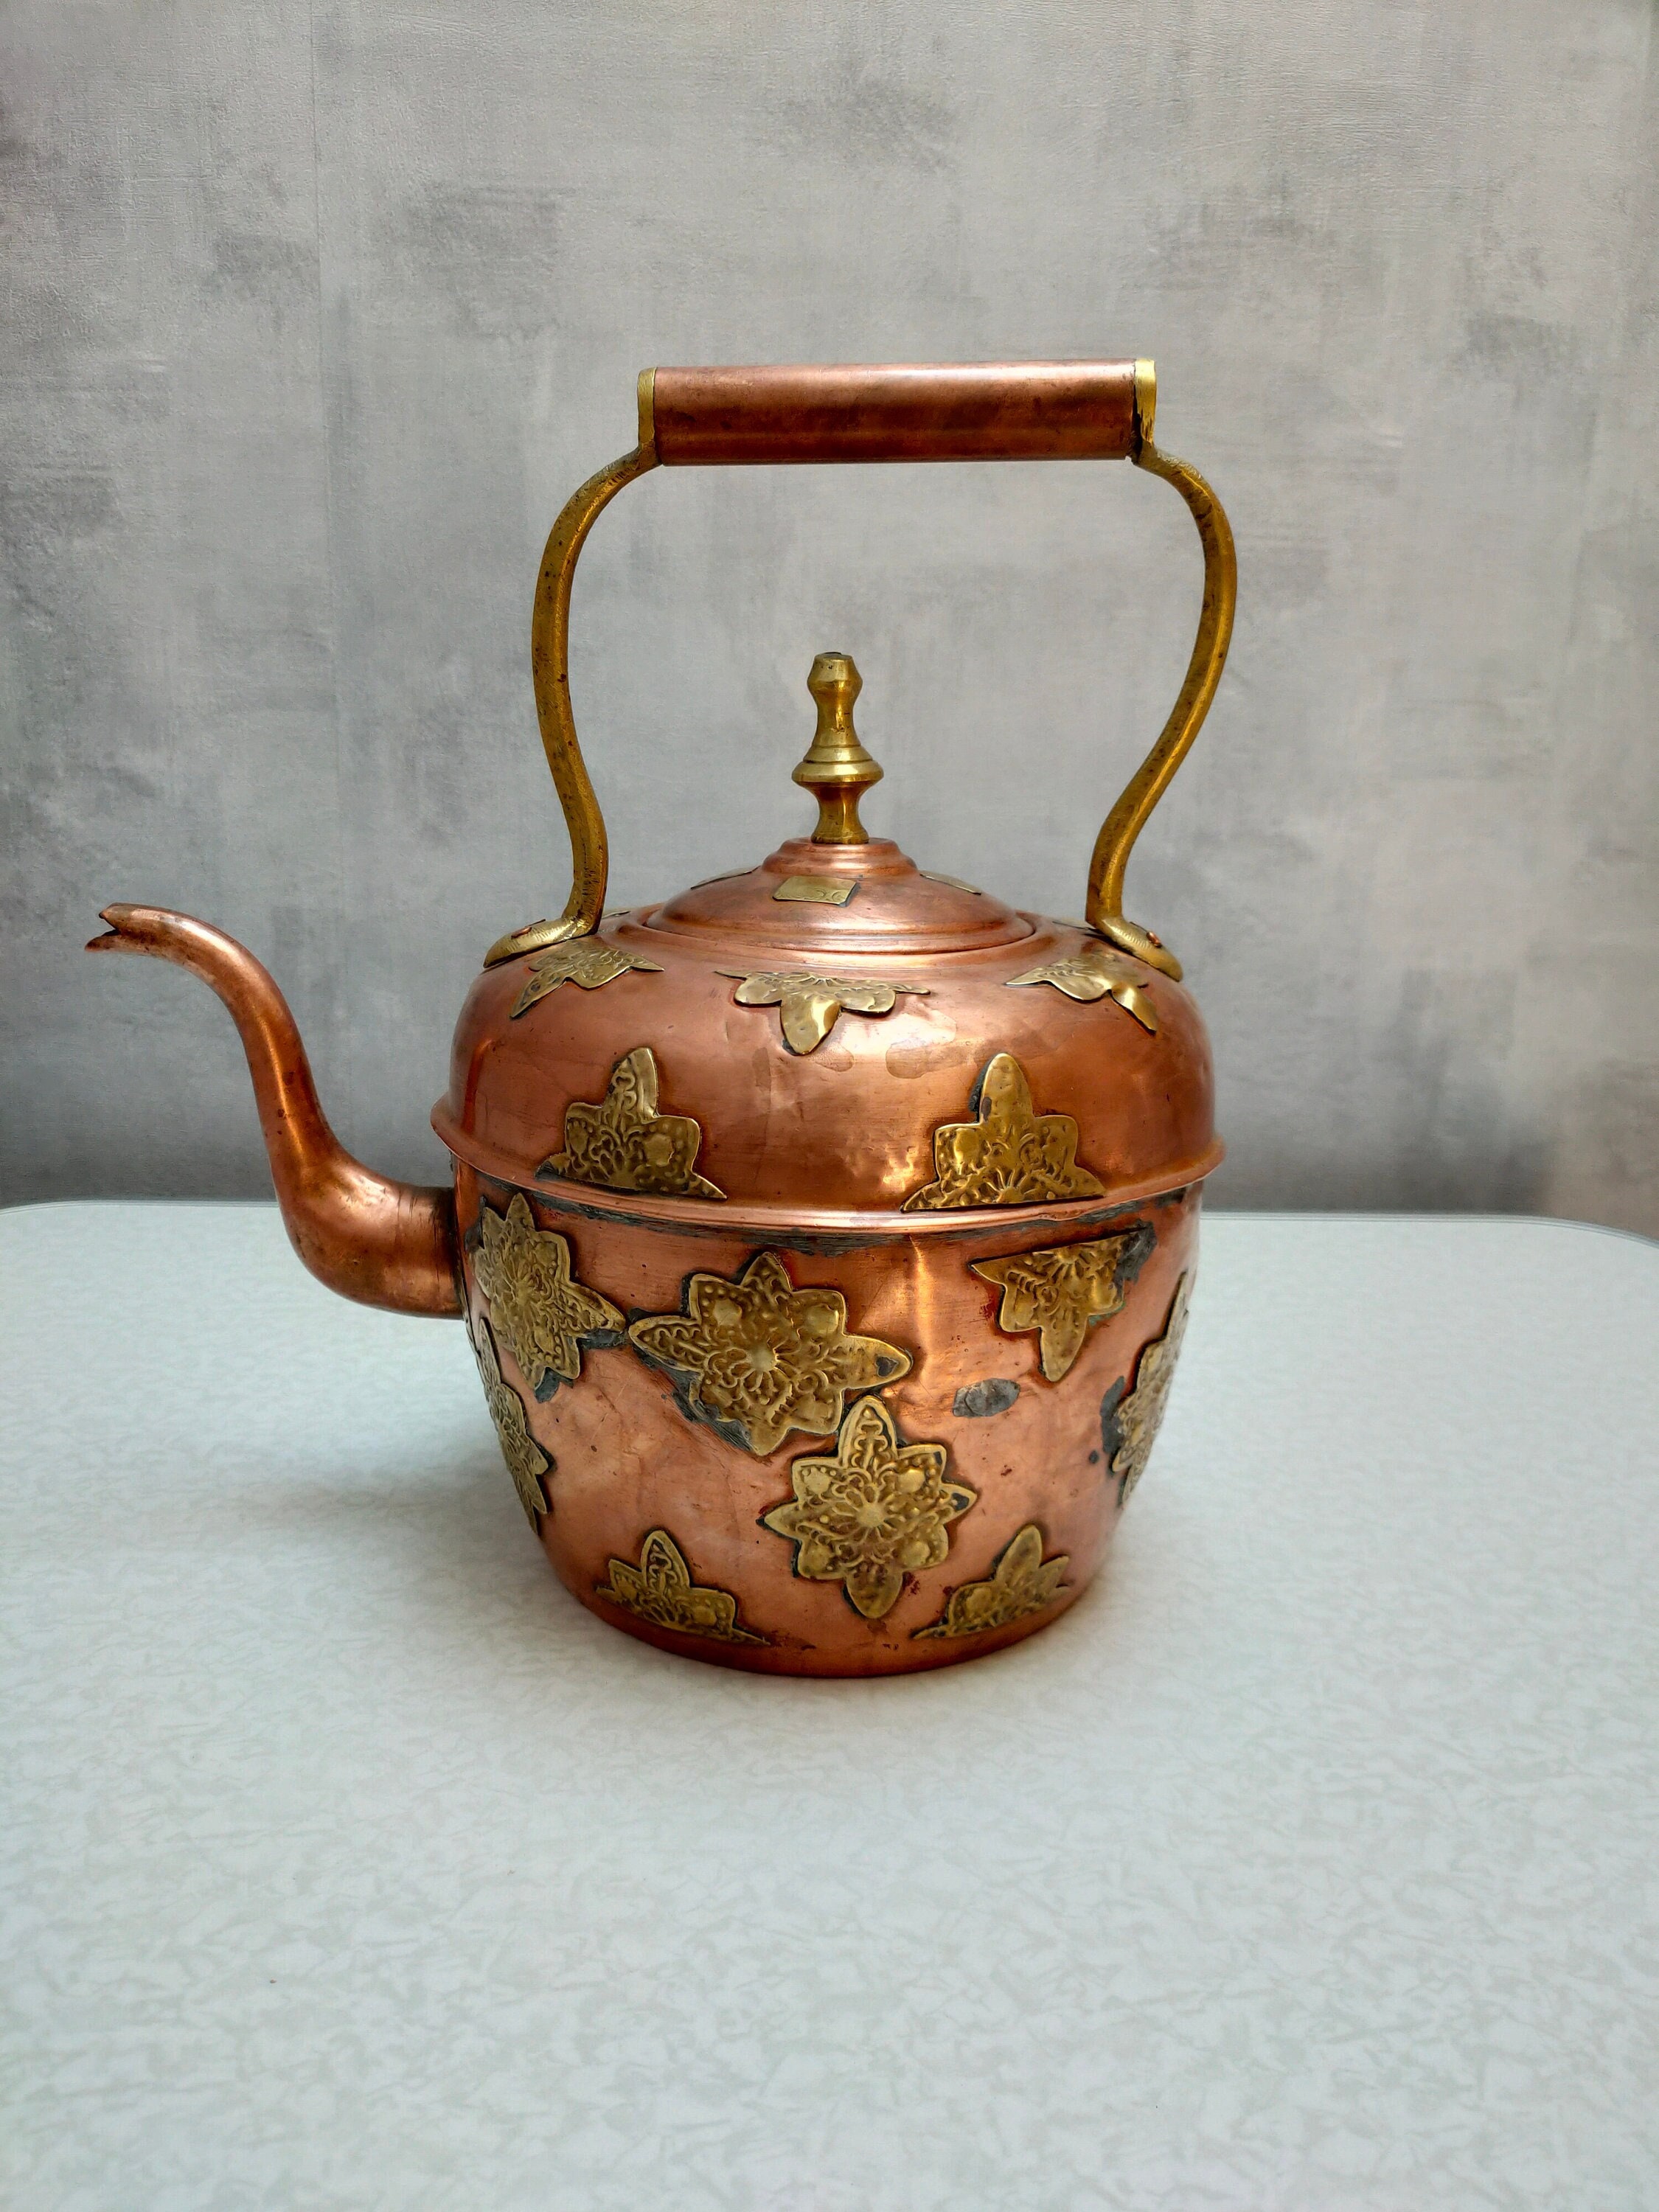 Large Moroccan Decorative Kettle Moroccan Artisanal Antique Nineteenth Century Copper and Brass